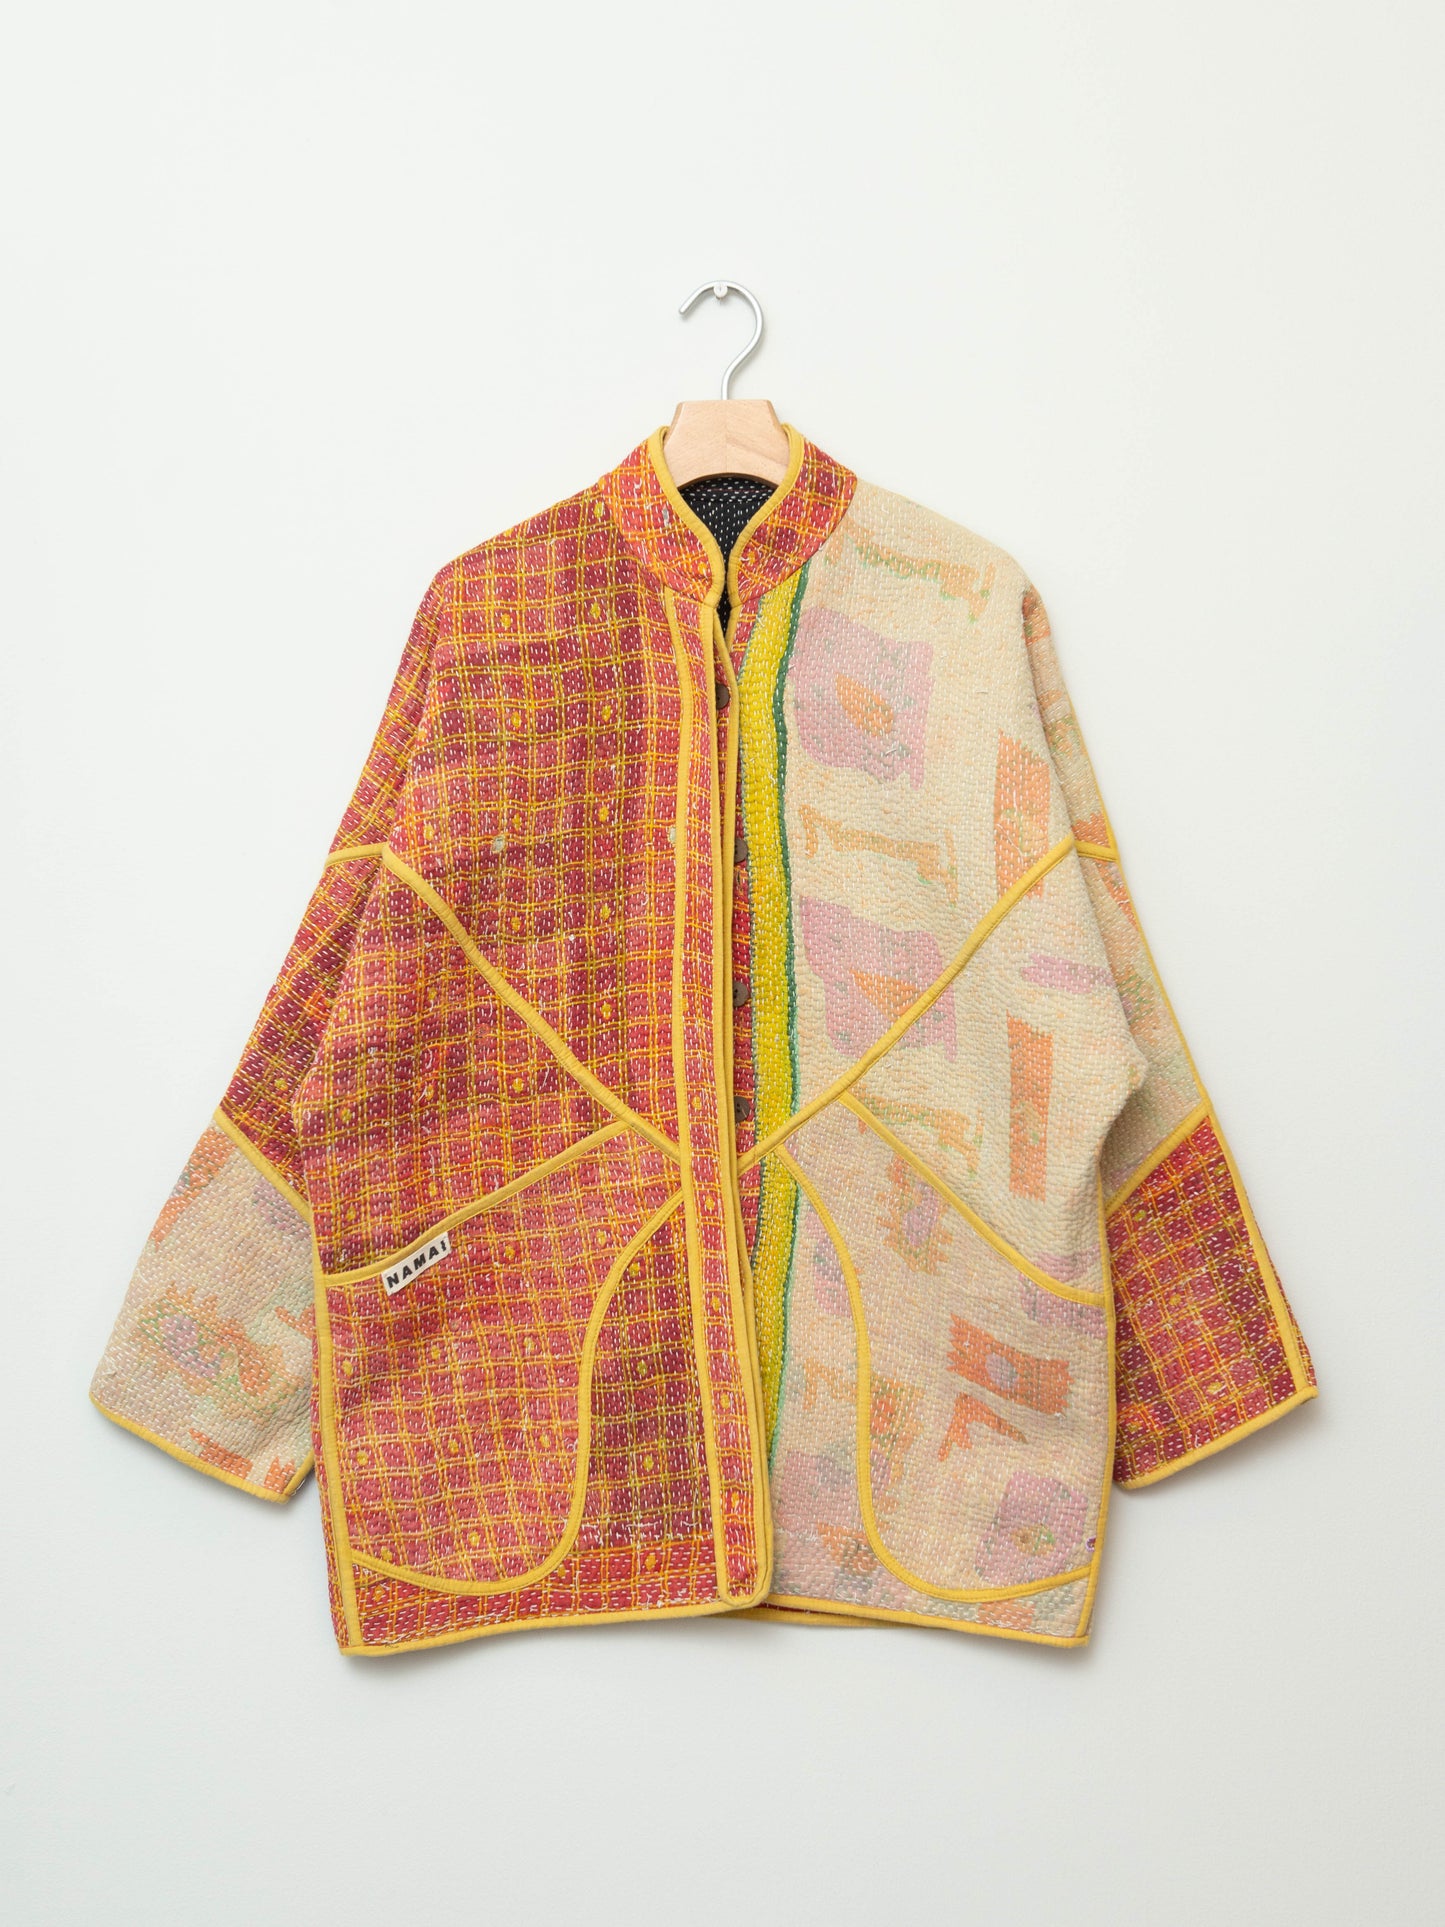 The Narmada Quilted Patchwork Kantha Jacket